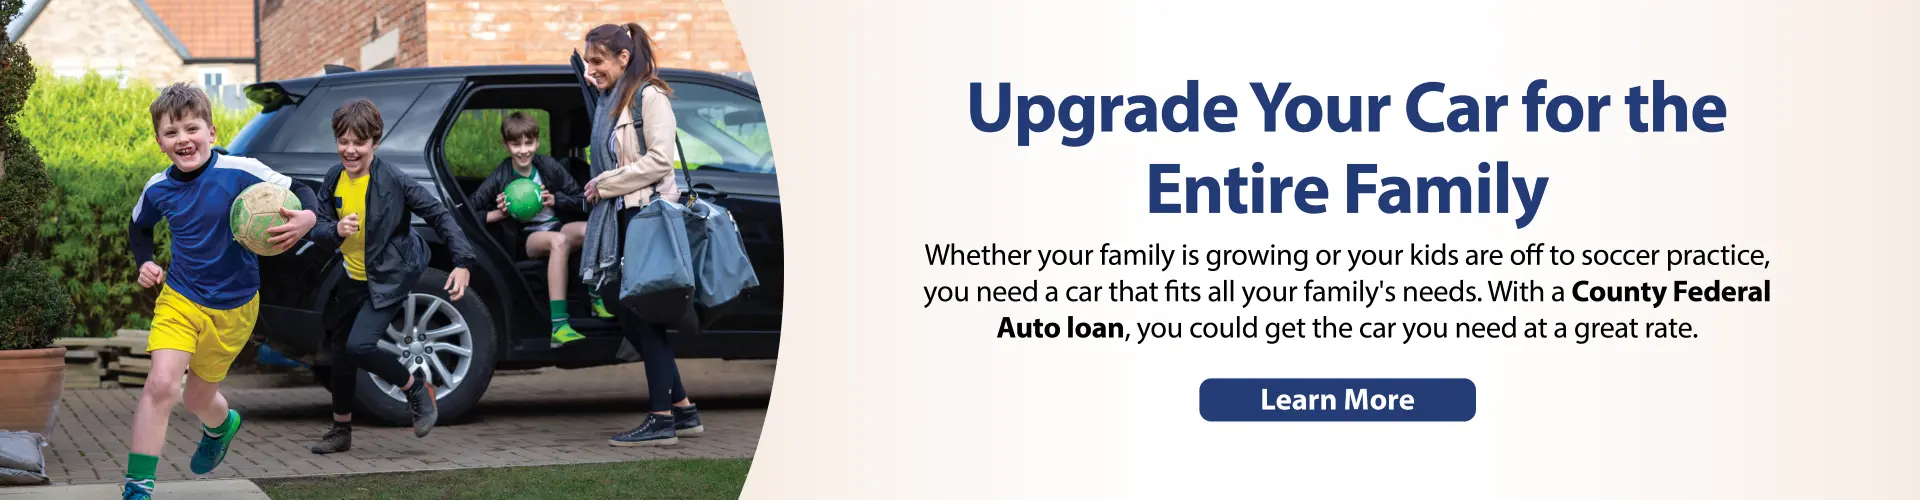 Upgrade Your Car for the Entire Family